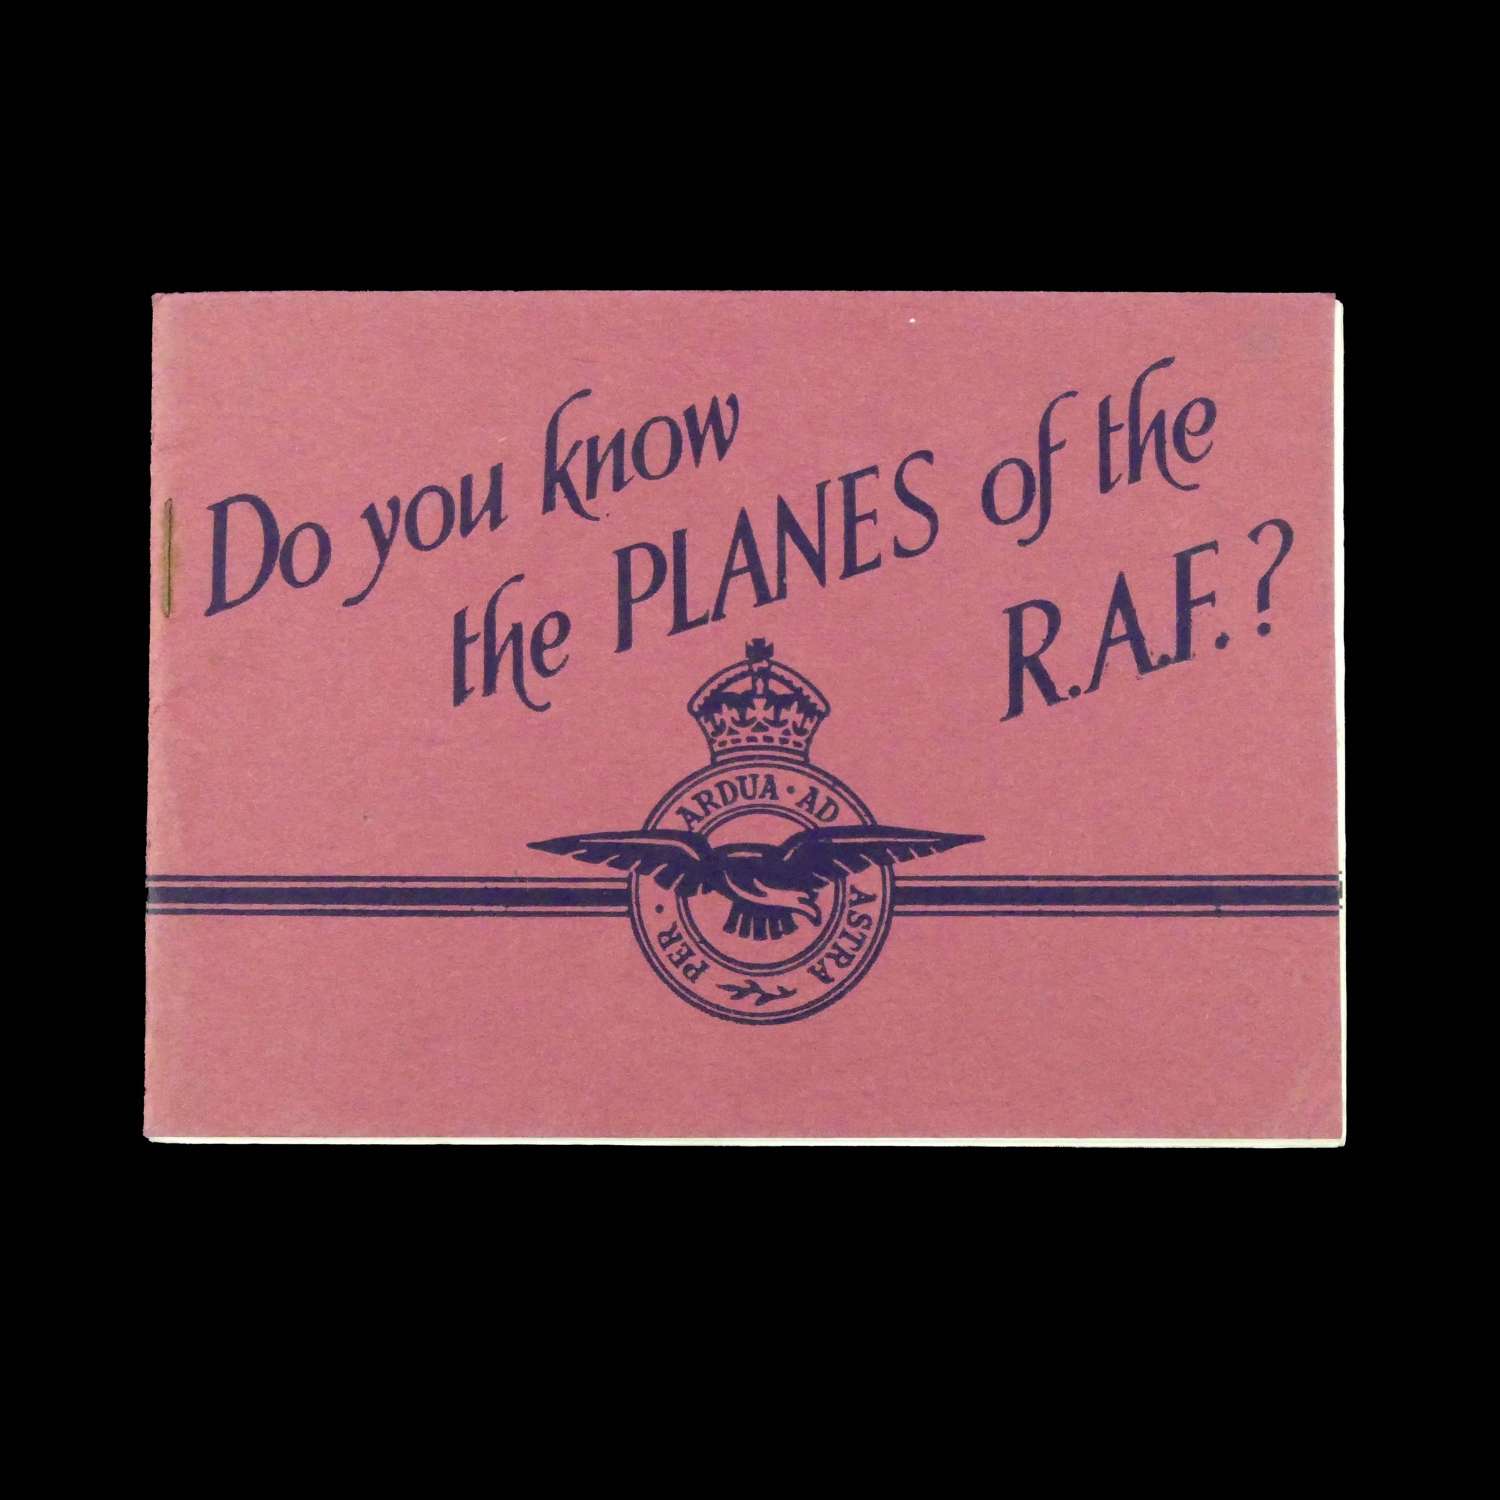 Do you know the planes of the RAF?